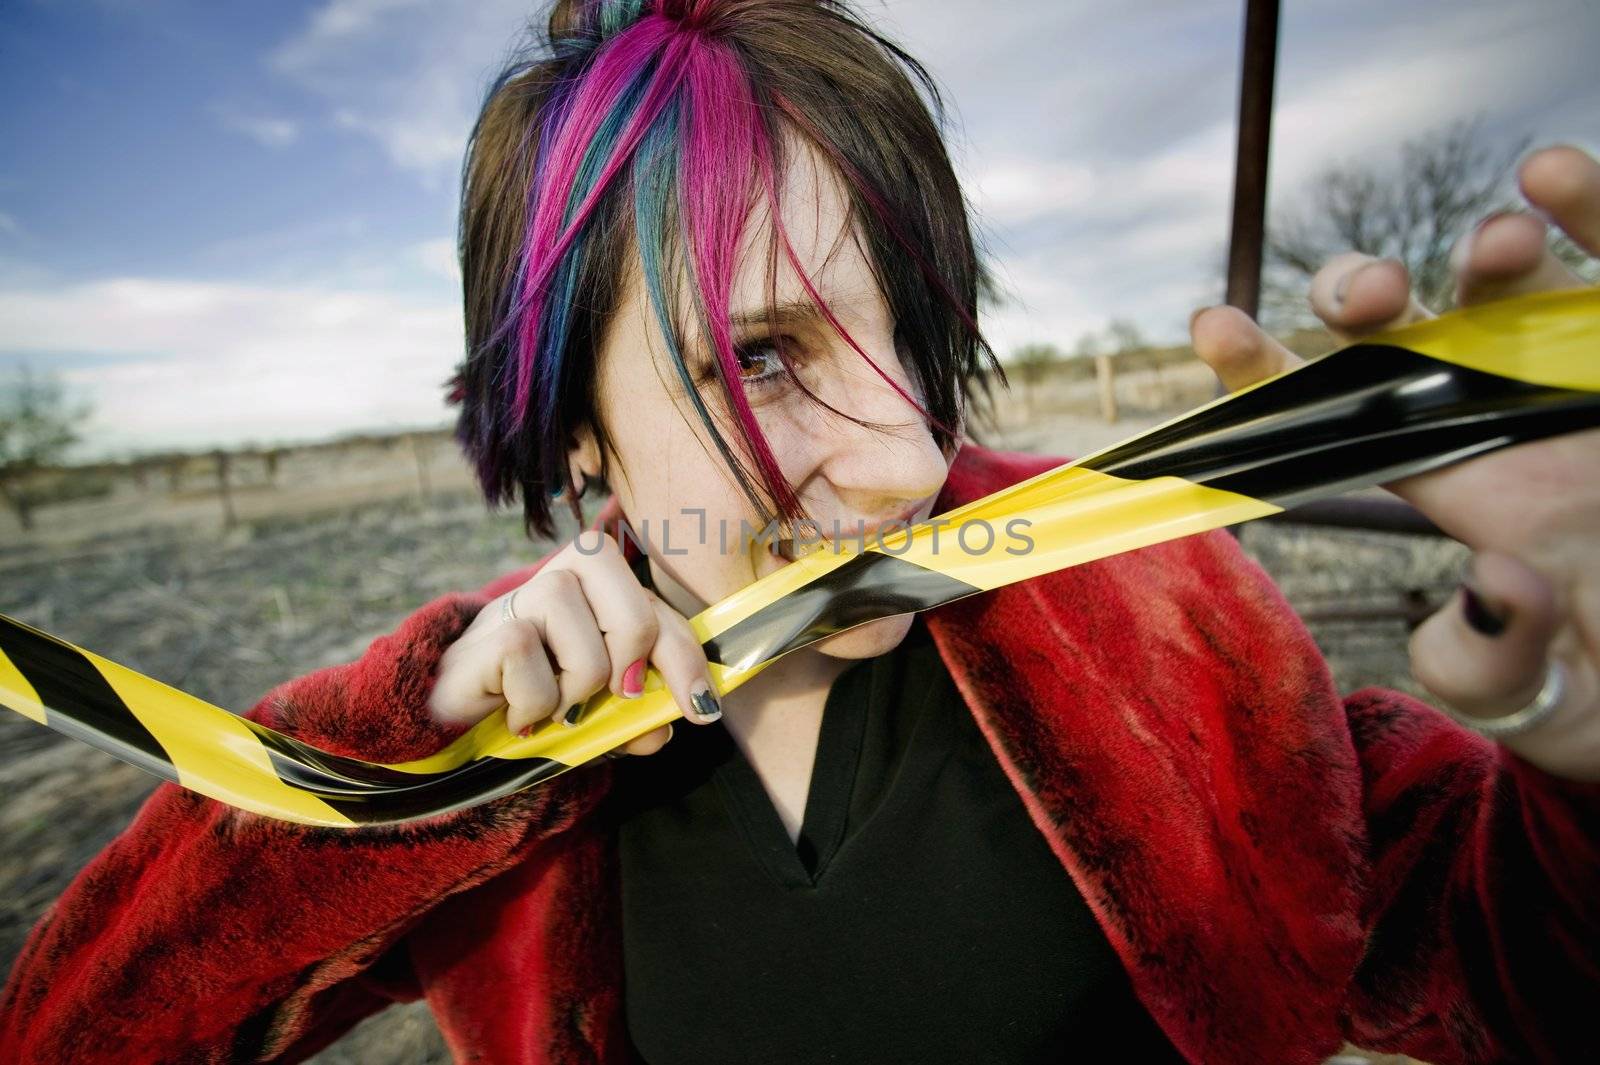 Punk girl outdoors biting a strip of yellow and black caution tape